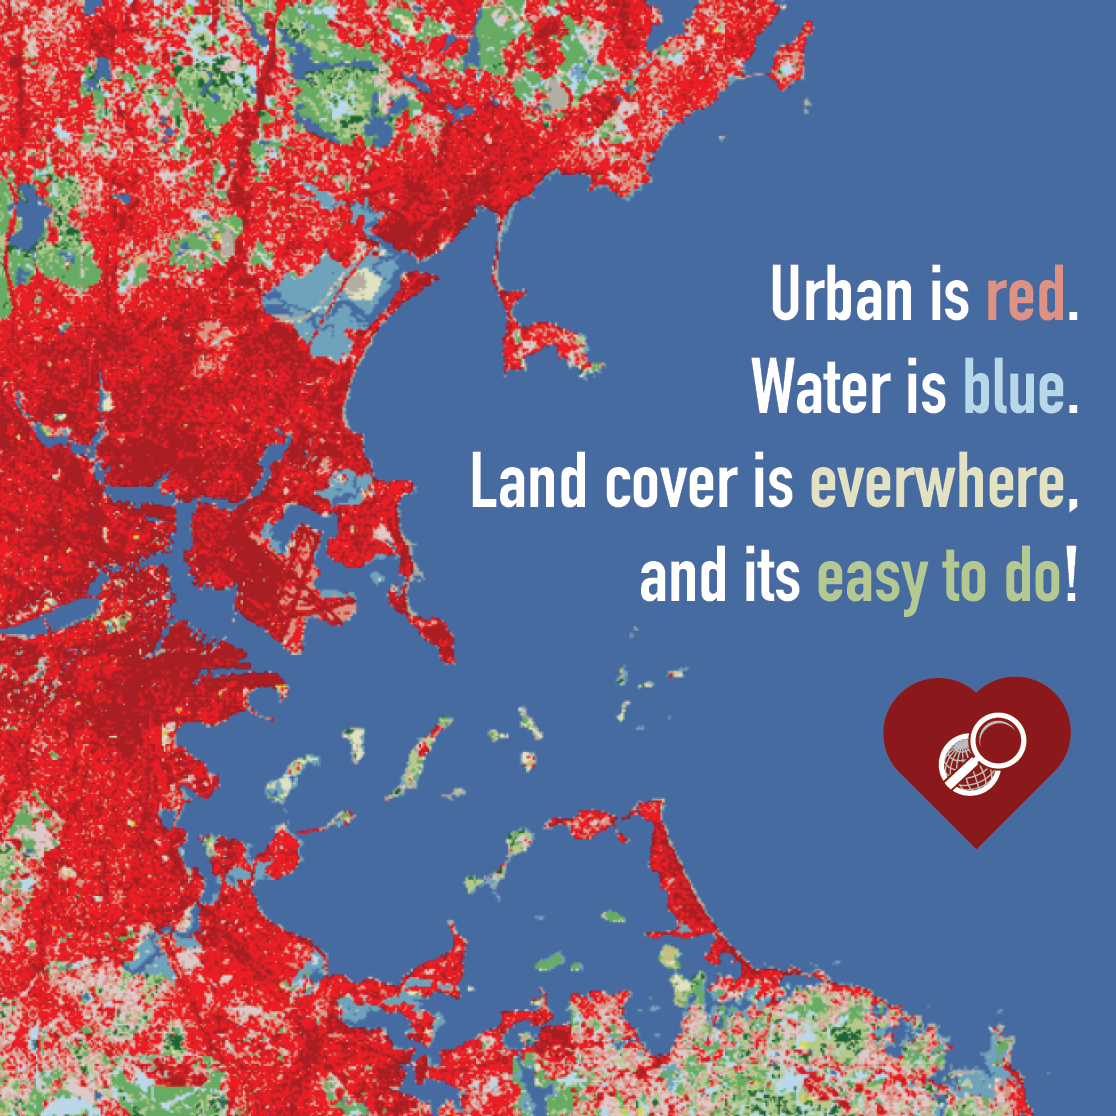 "Urban is red, water is blue, land cover is everywhere and it's easy to do!" on a background of a satellite image with color-coded land cover types.